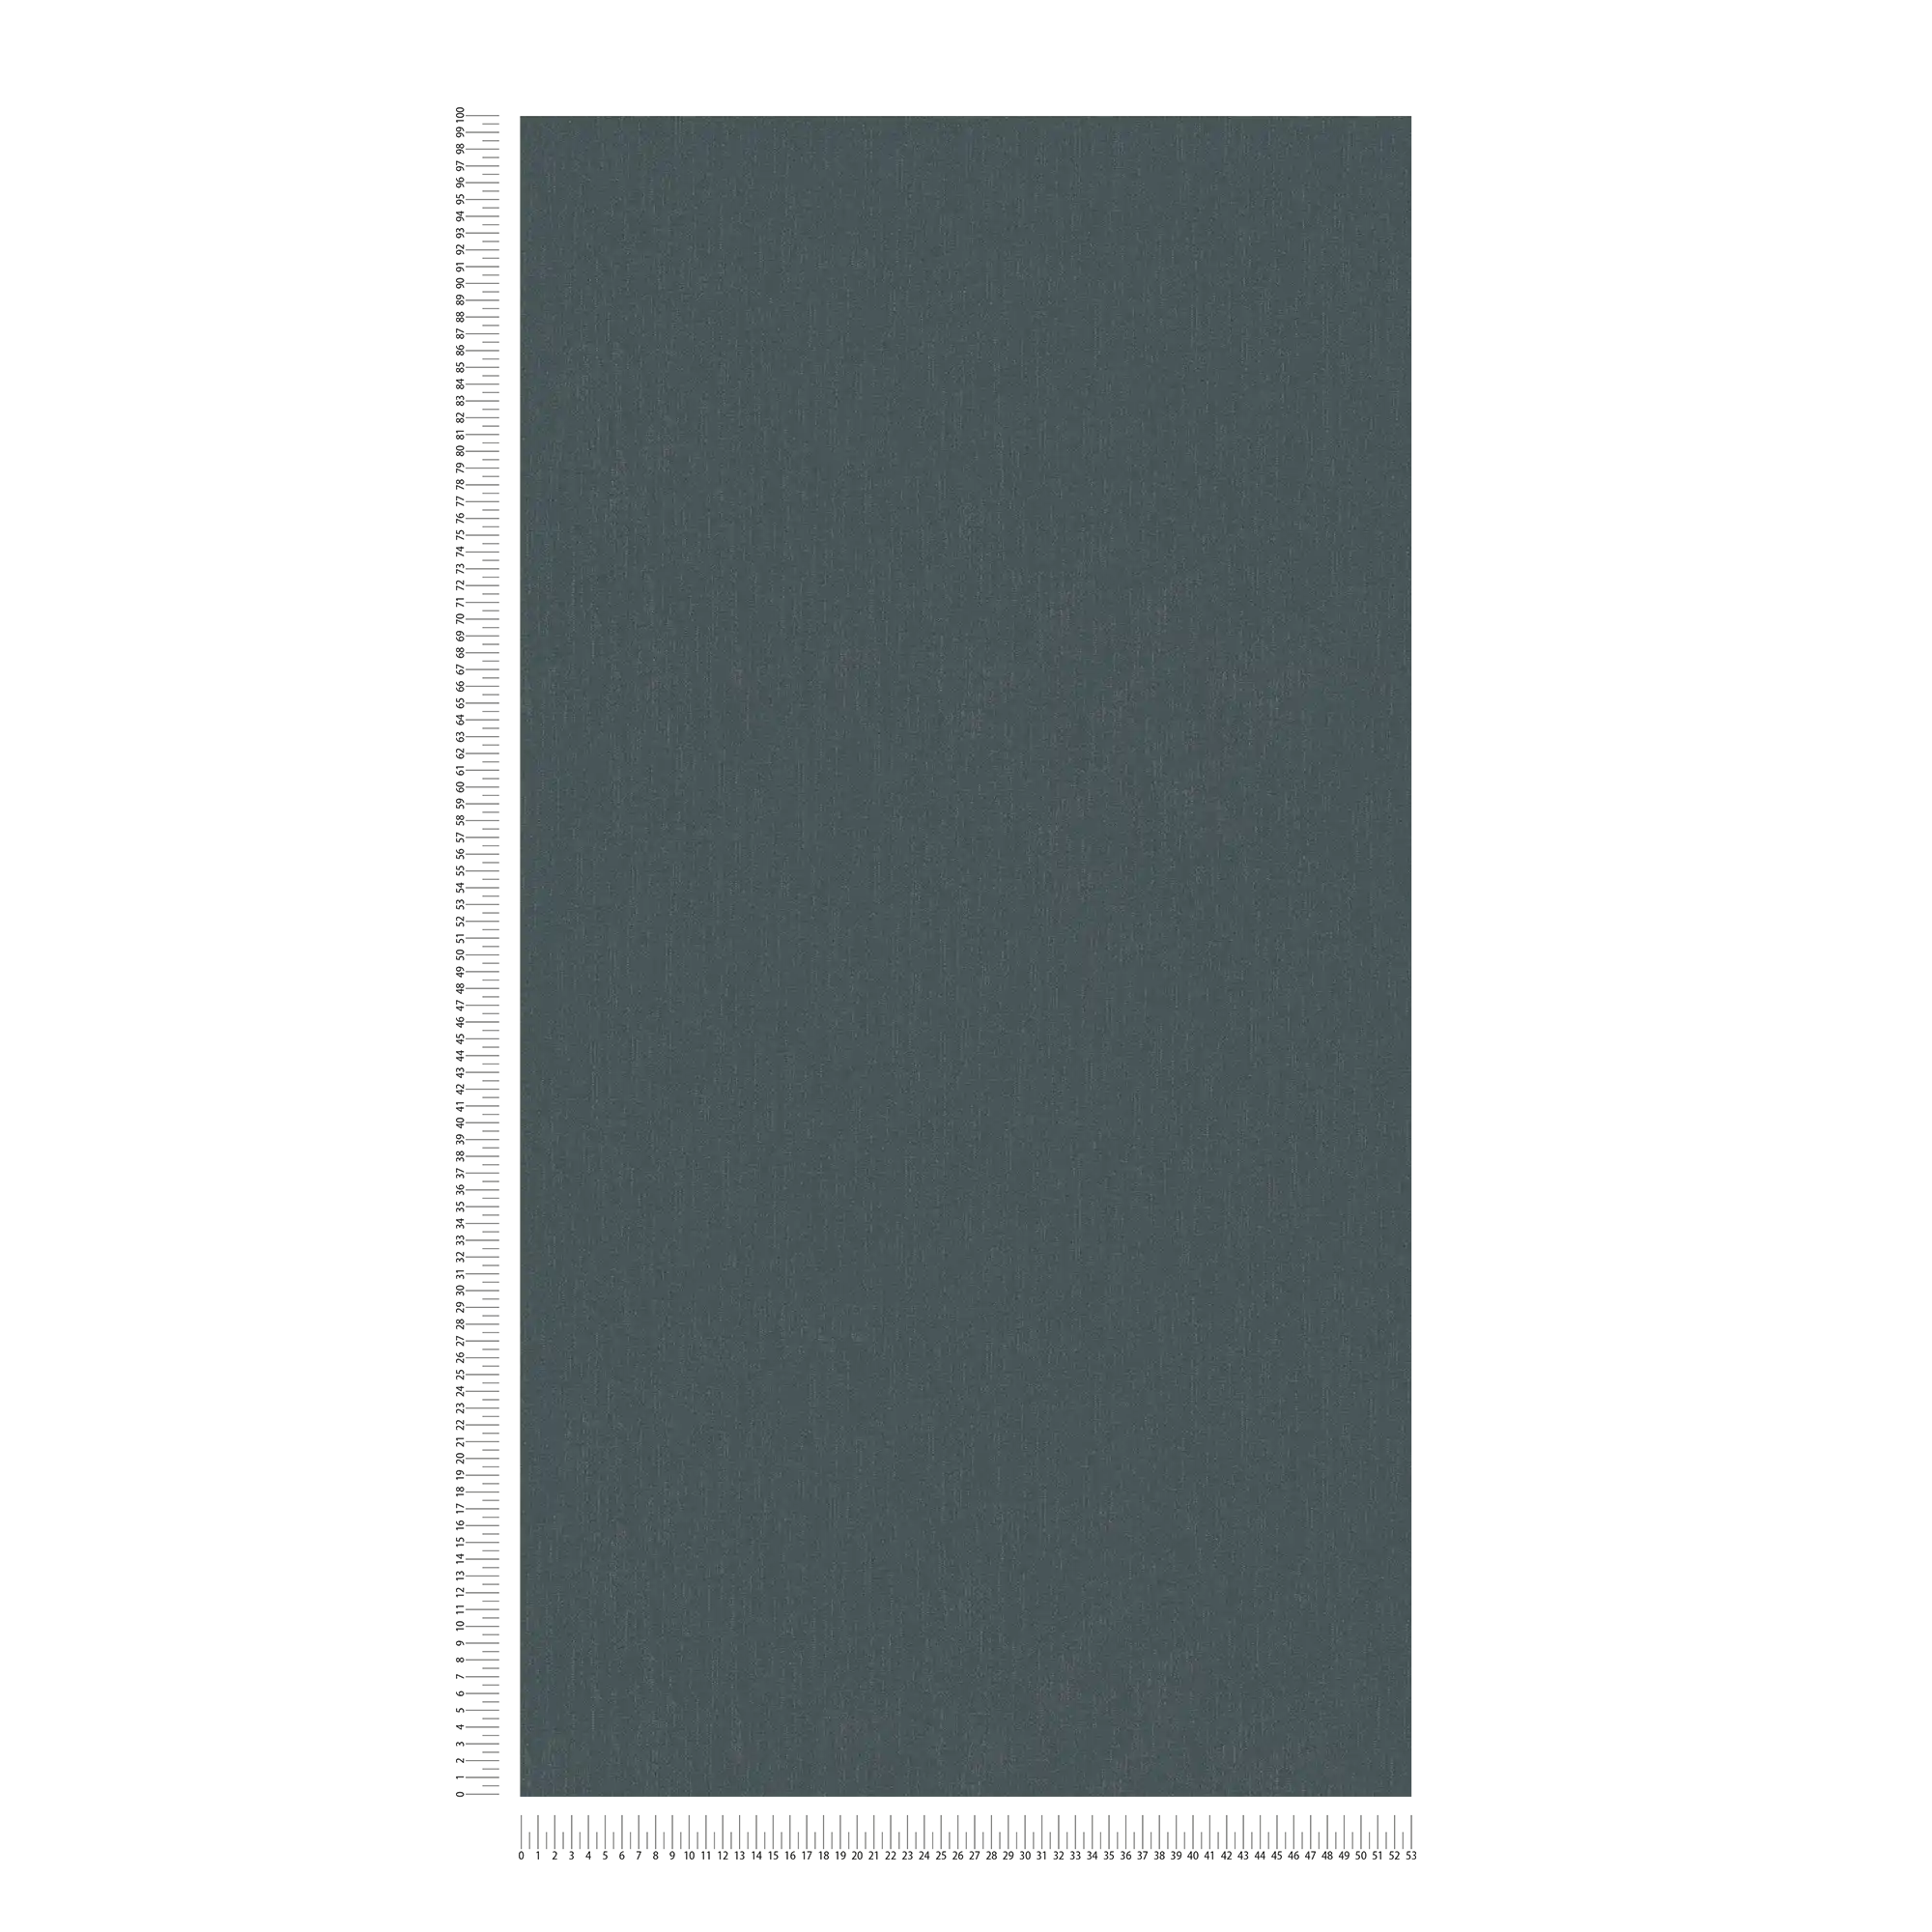             wallpaper anthracite grey with silver gloss effect - black, grey
        